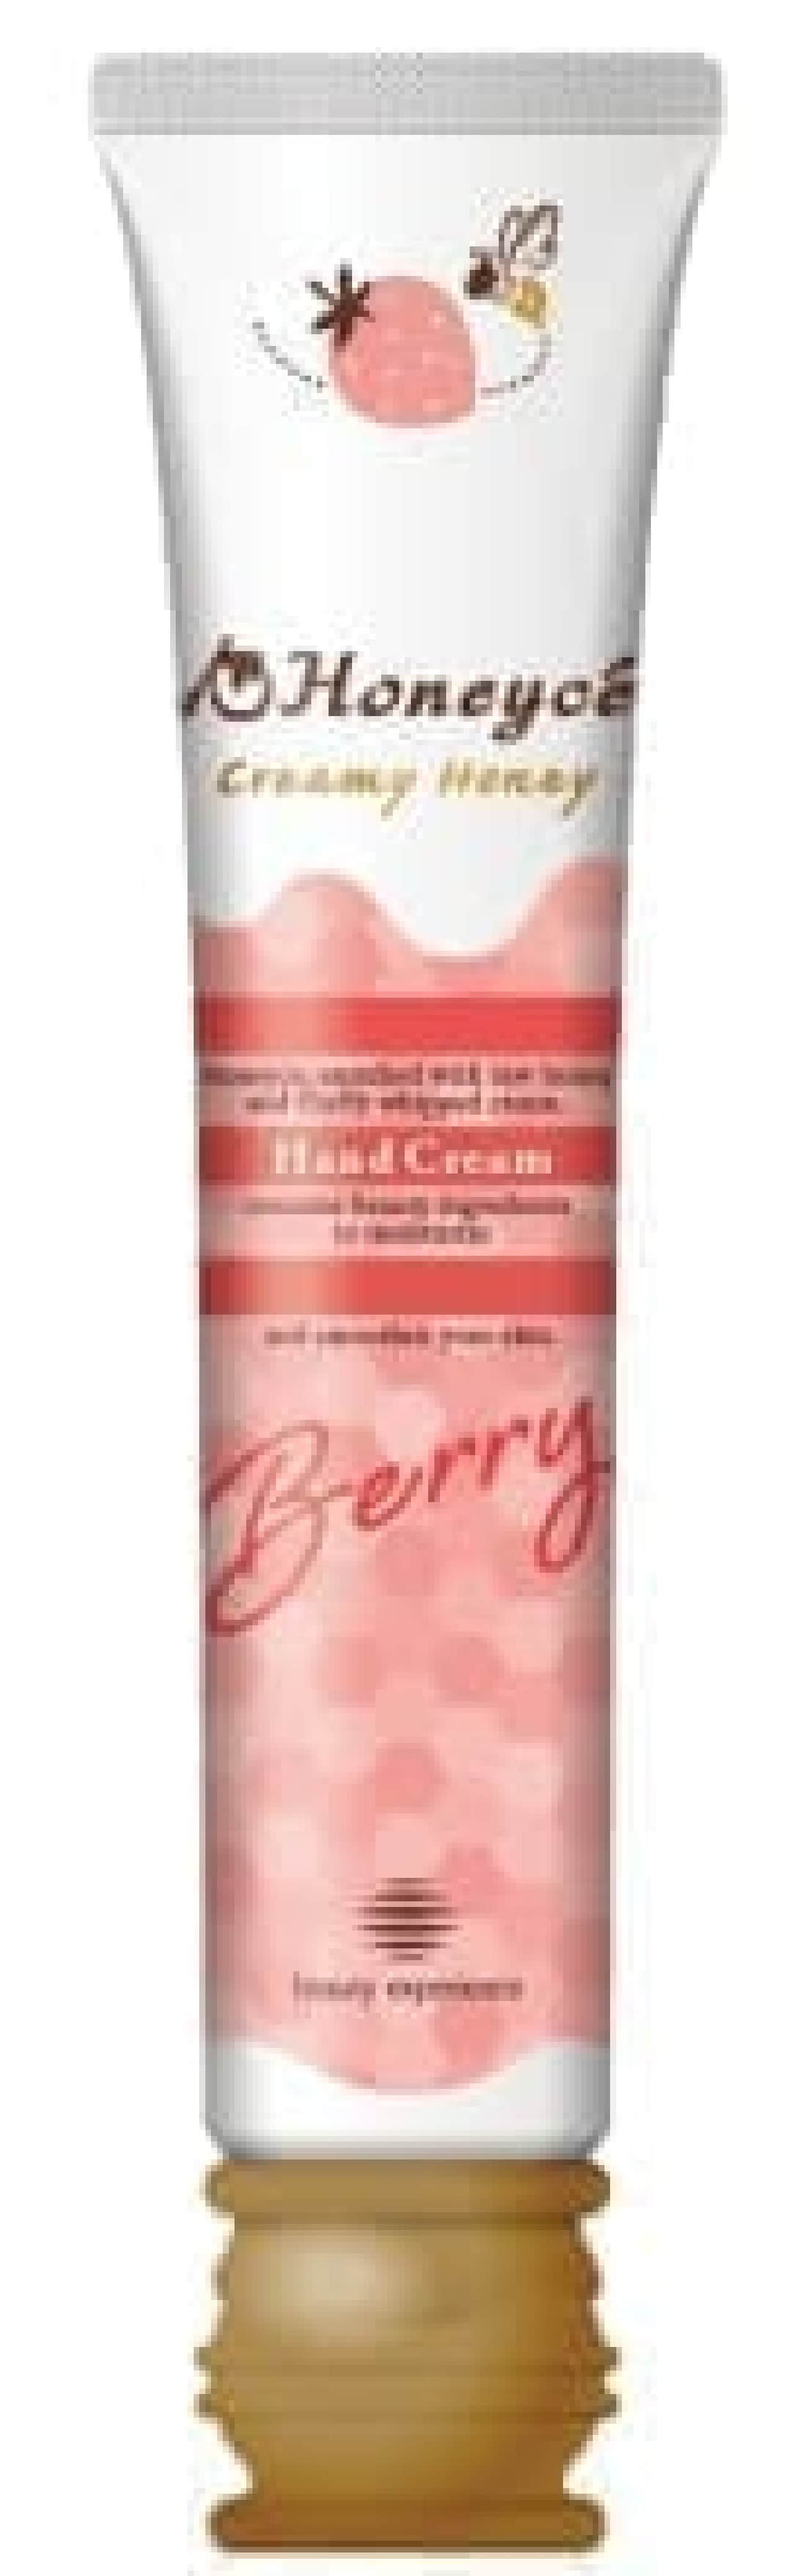 Honeyche and special berry hand cream